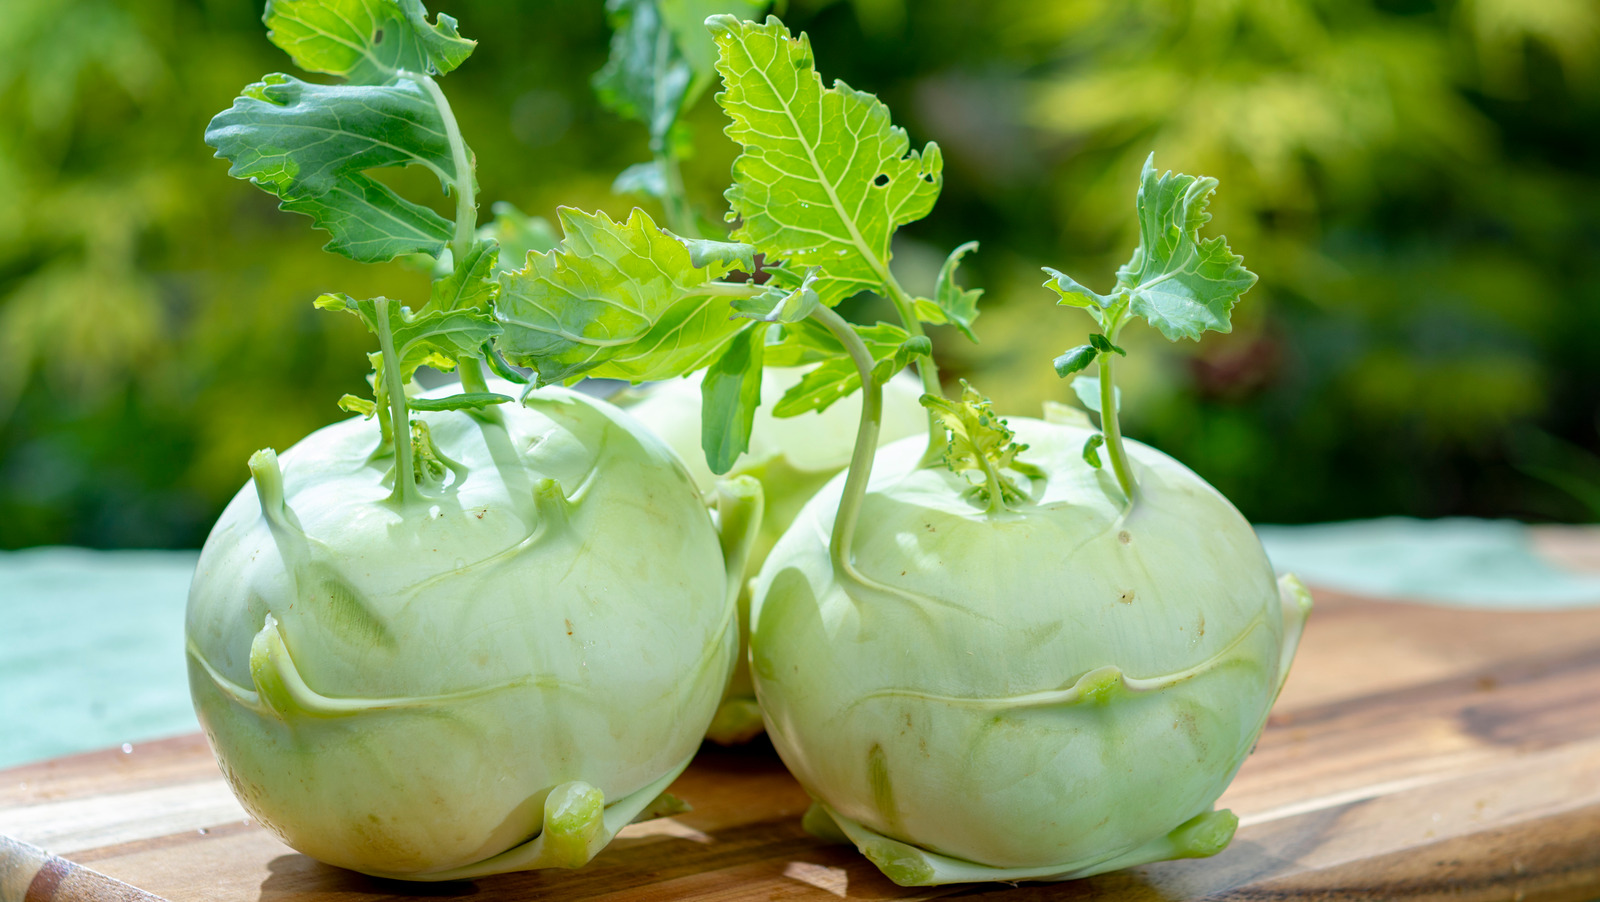 What Is Kohlrabi And What Does It Taste Like?